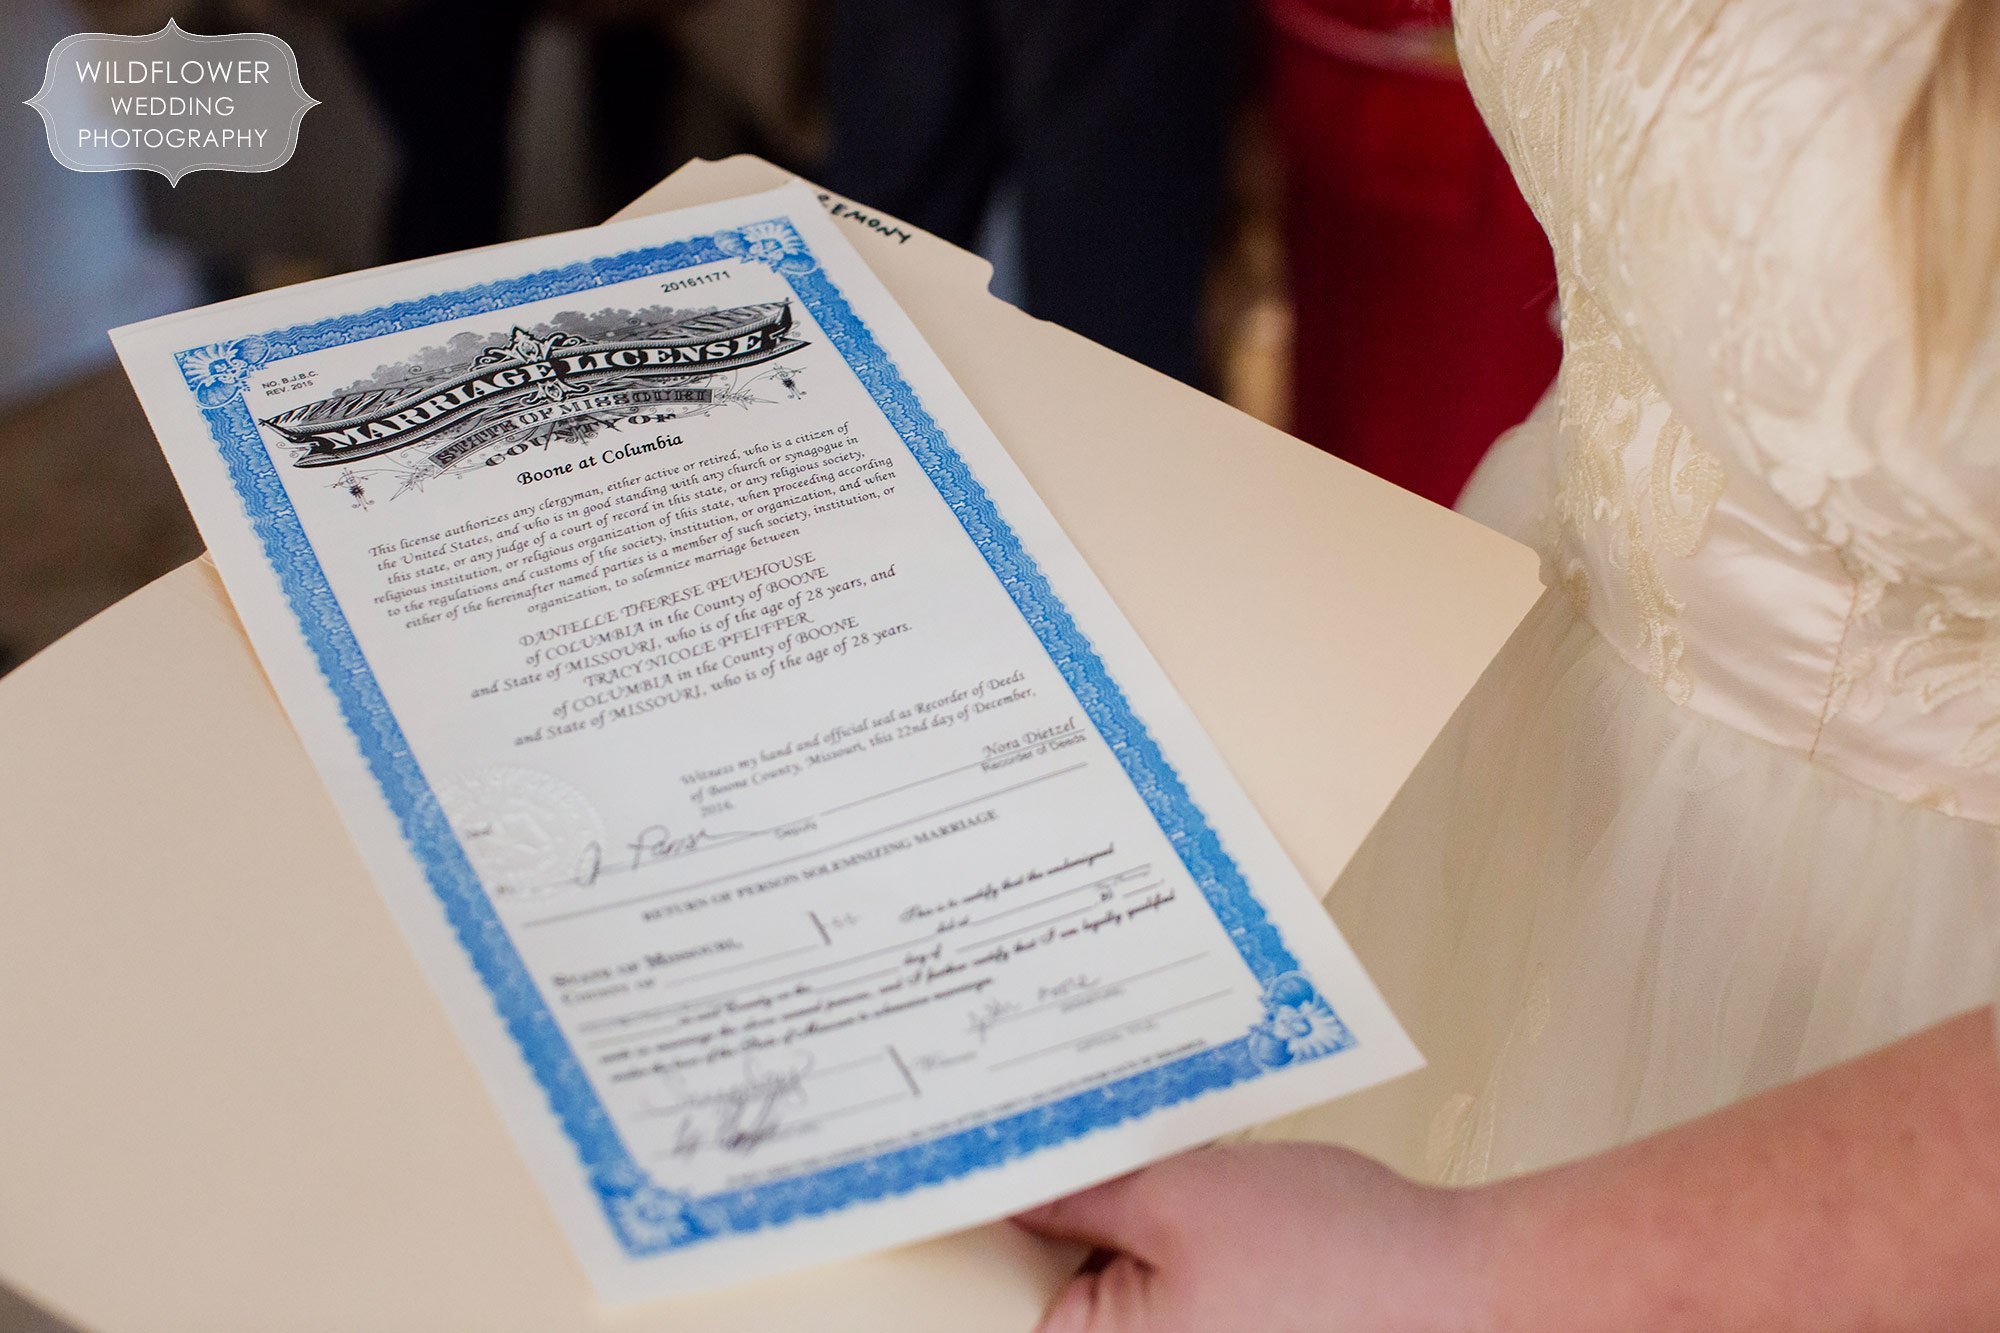 Marriage license for a gay couple in Columbia, MO after their winter wedding.